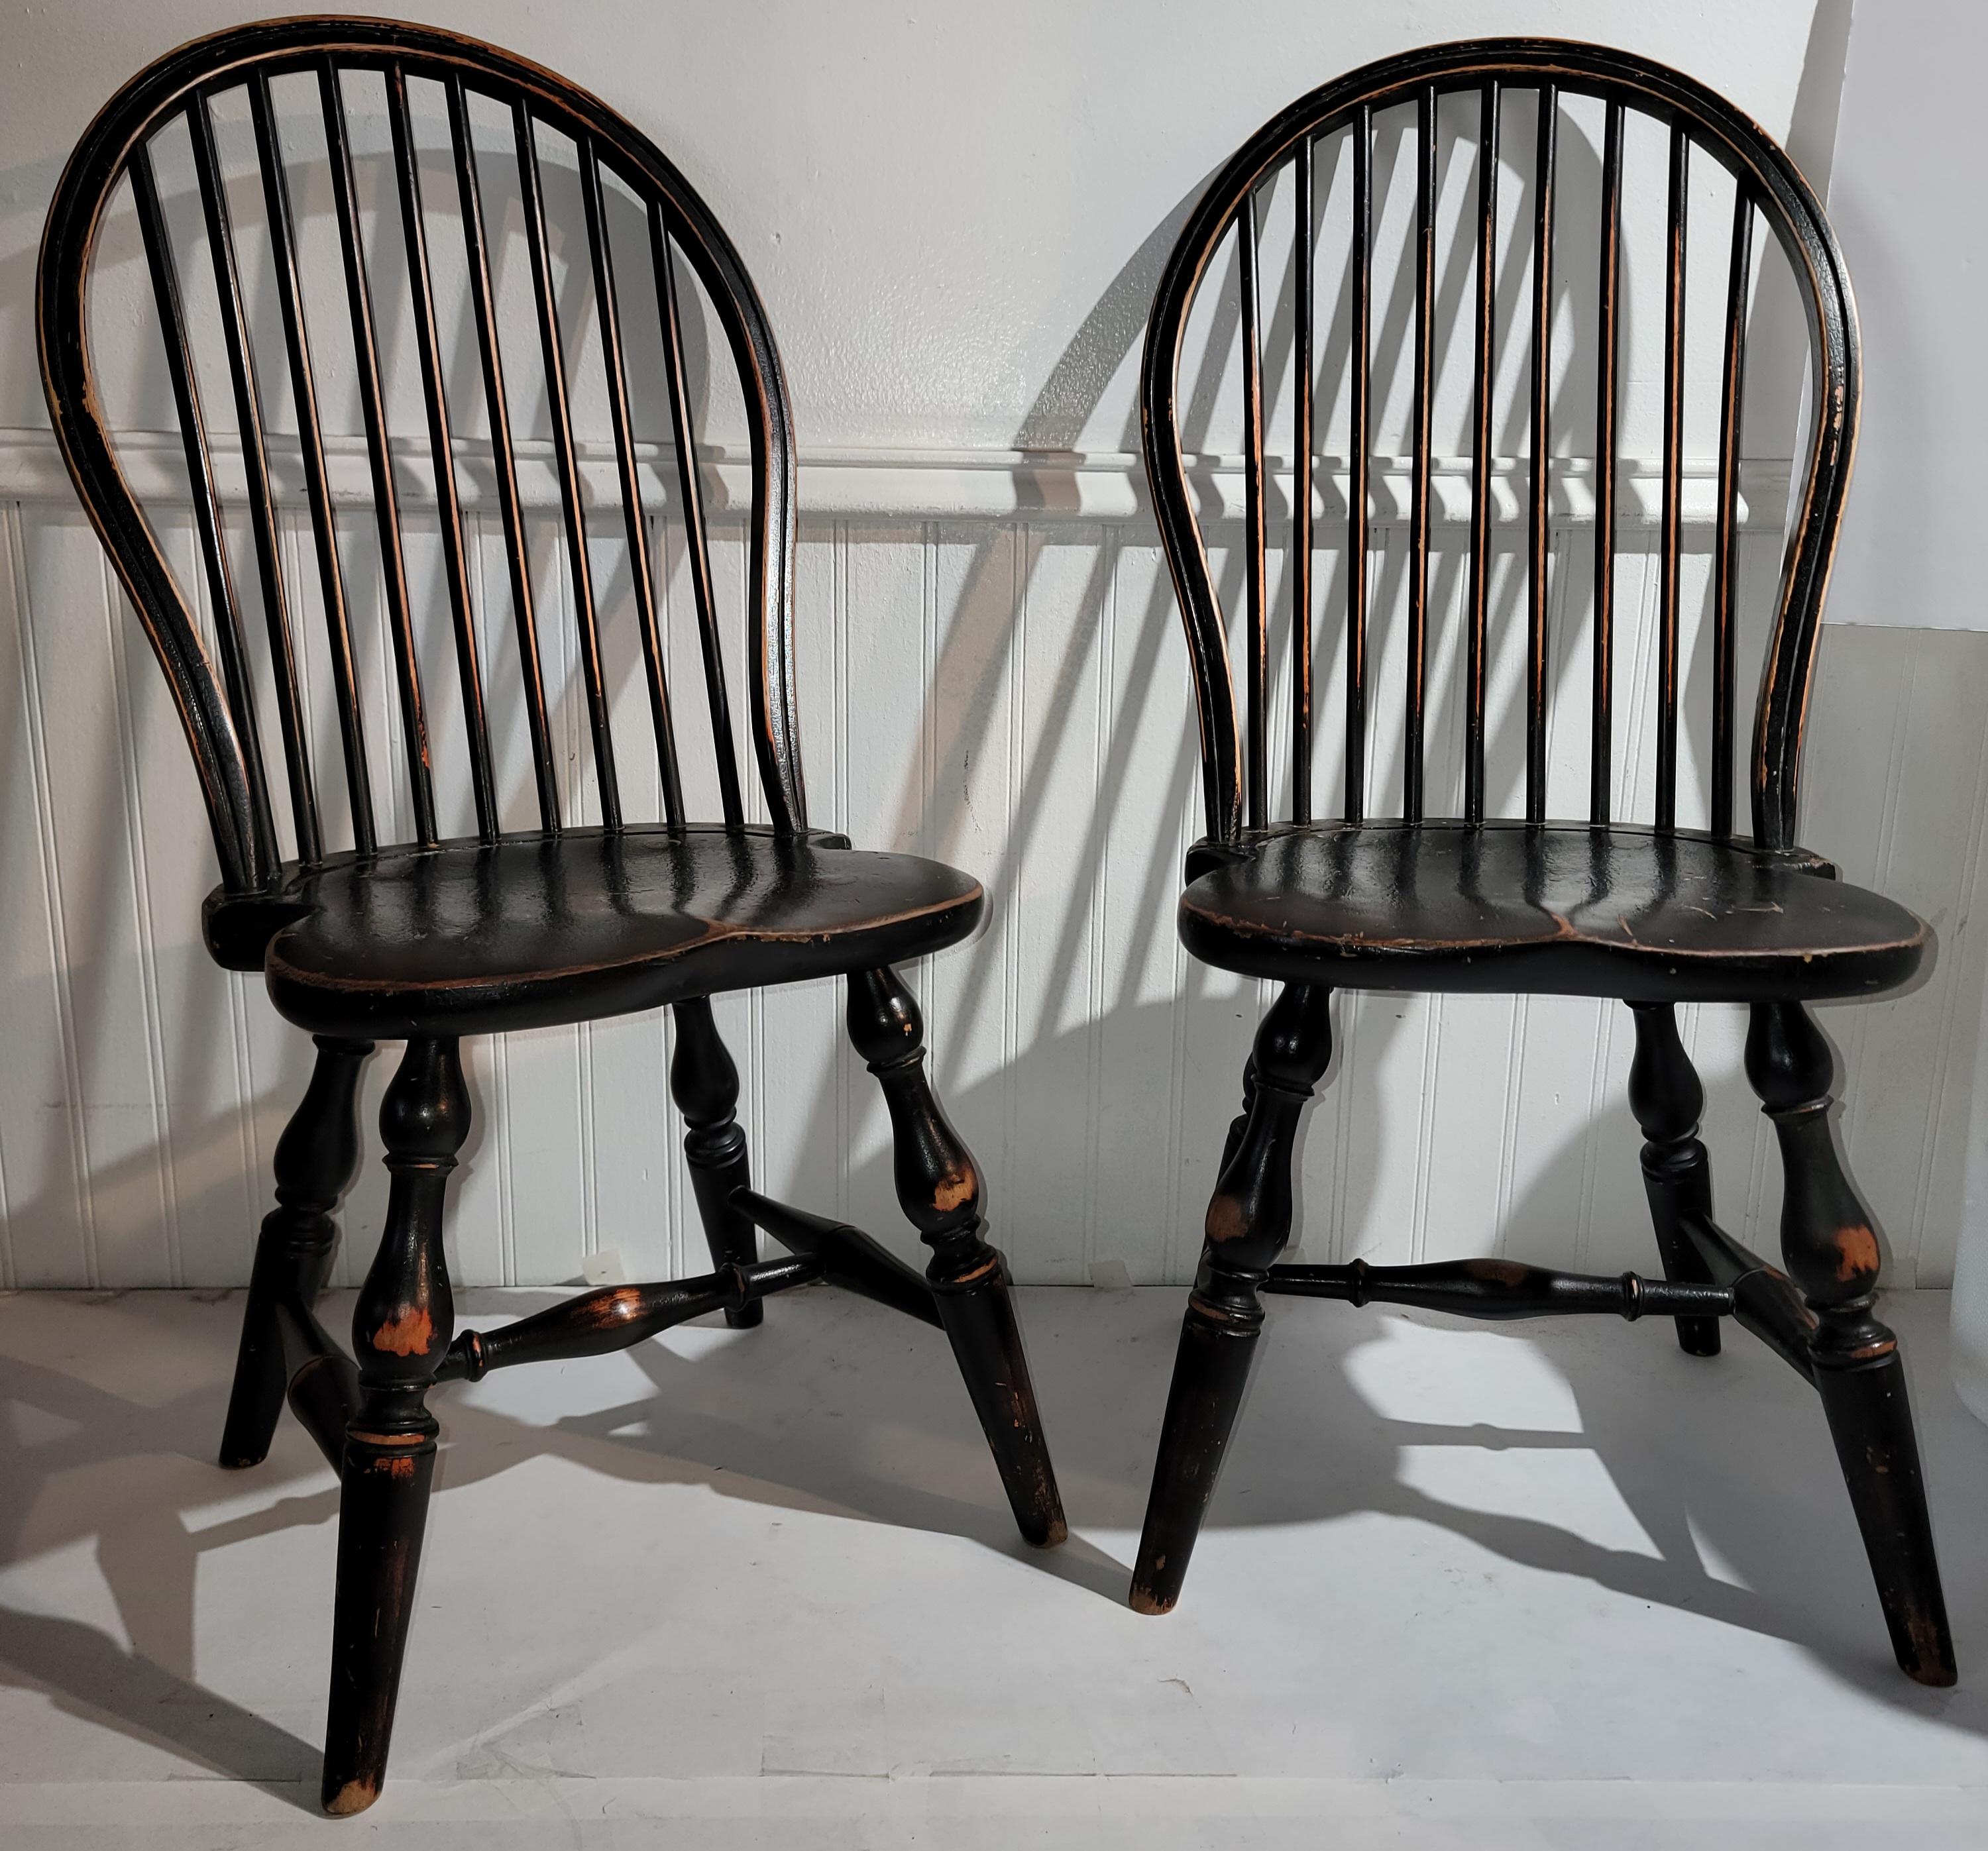 20th Century Windsor Children's Chairs in Original Black Paint For Sale 1